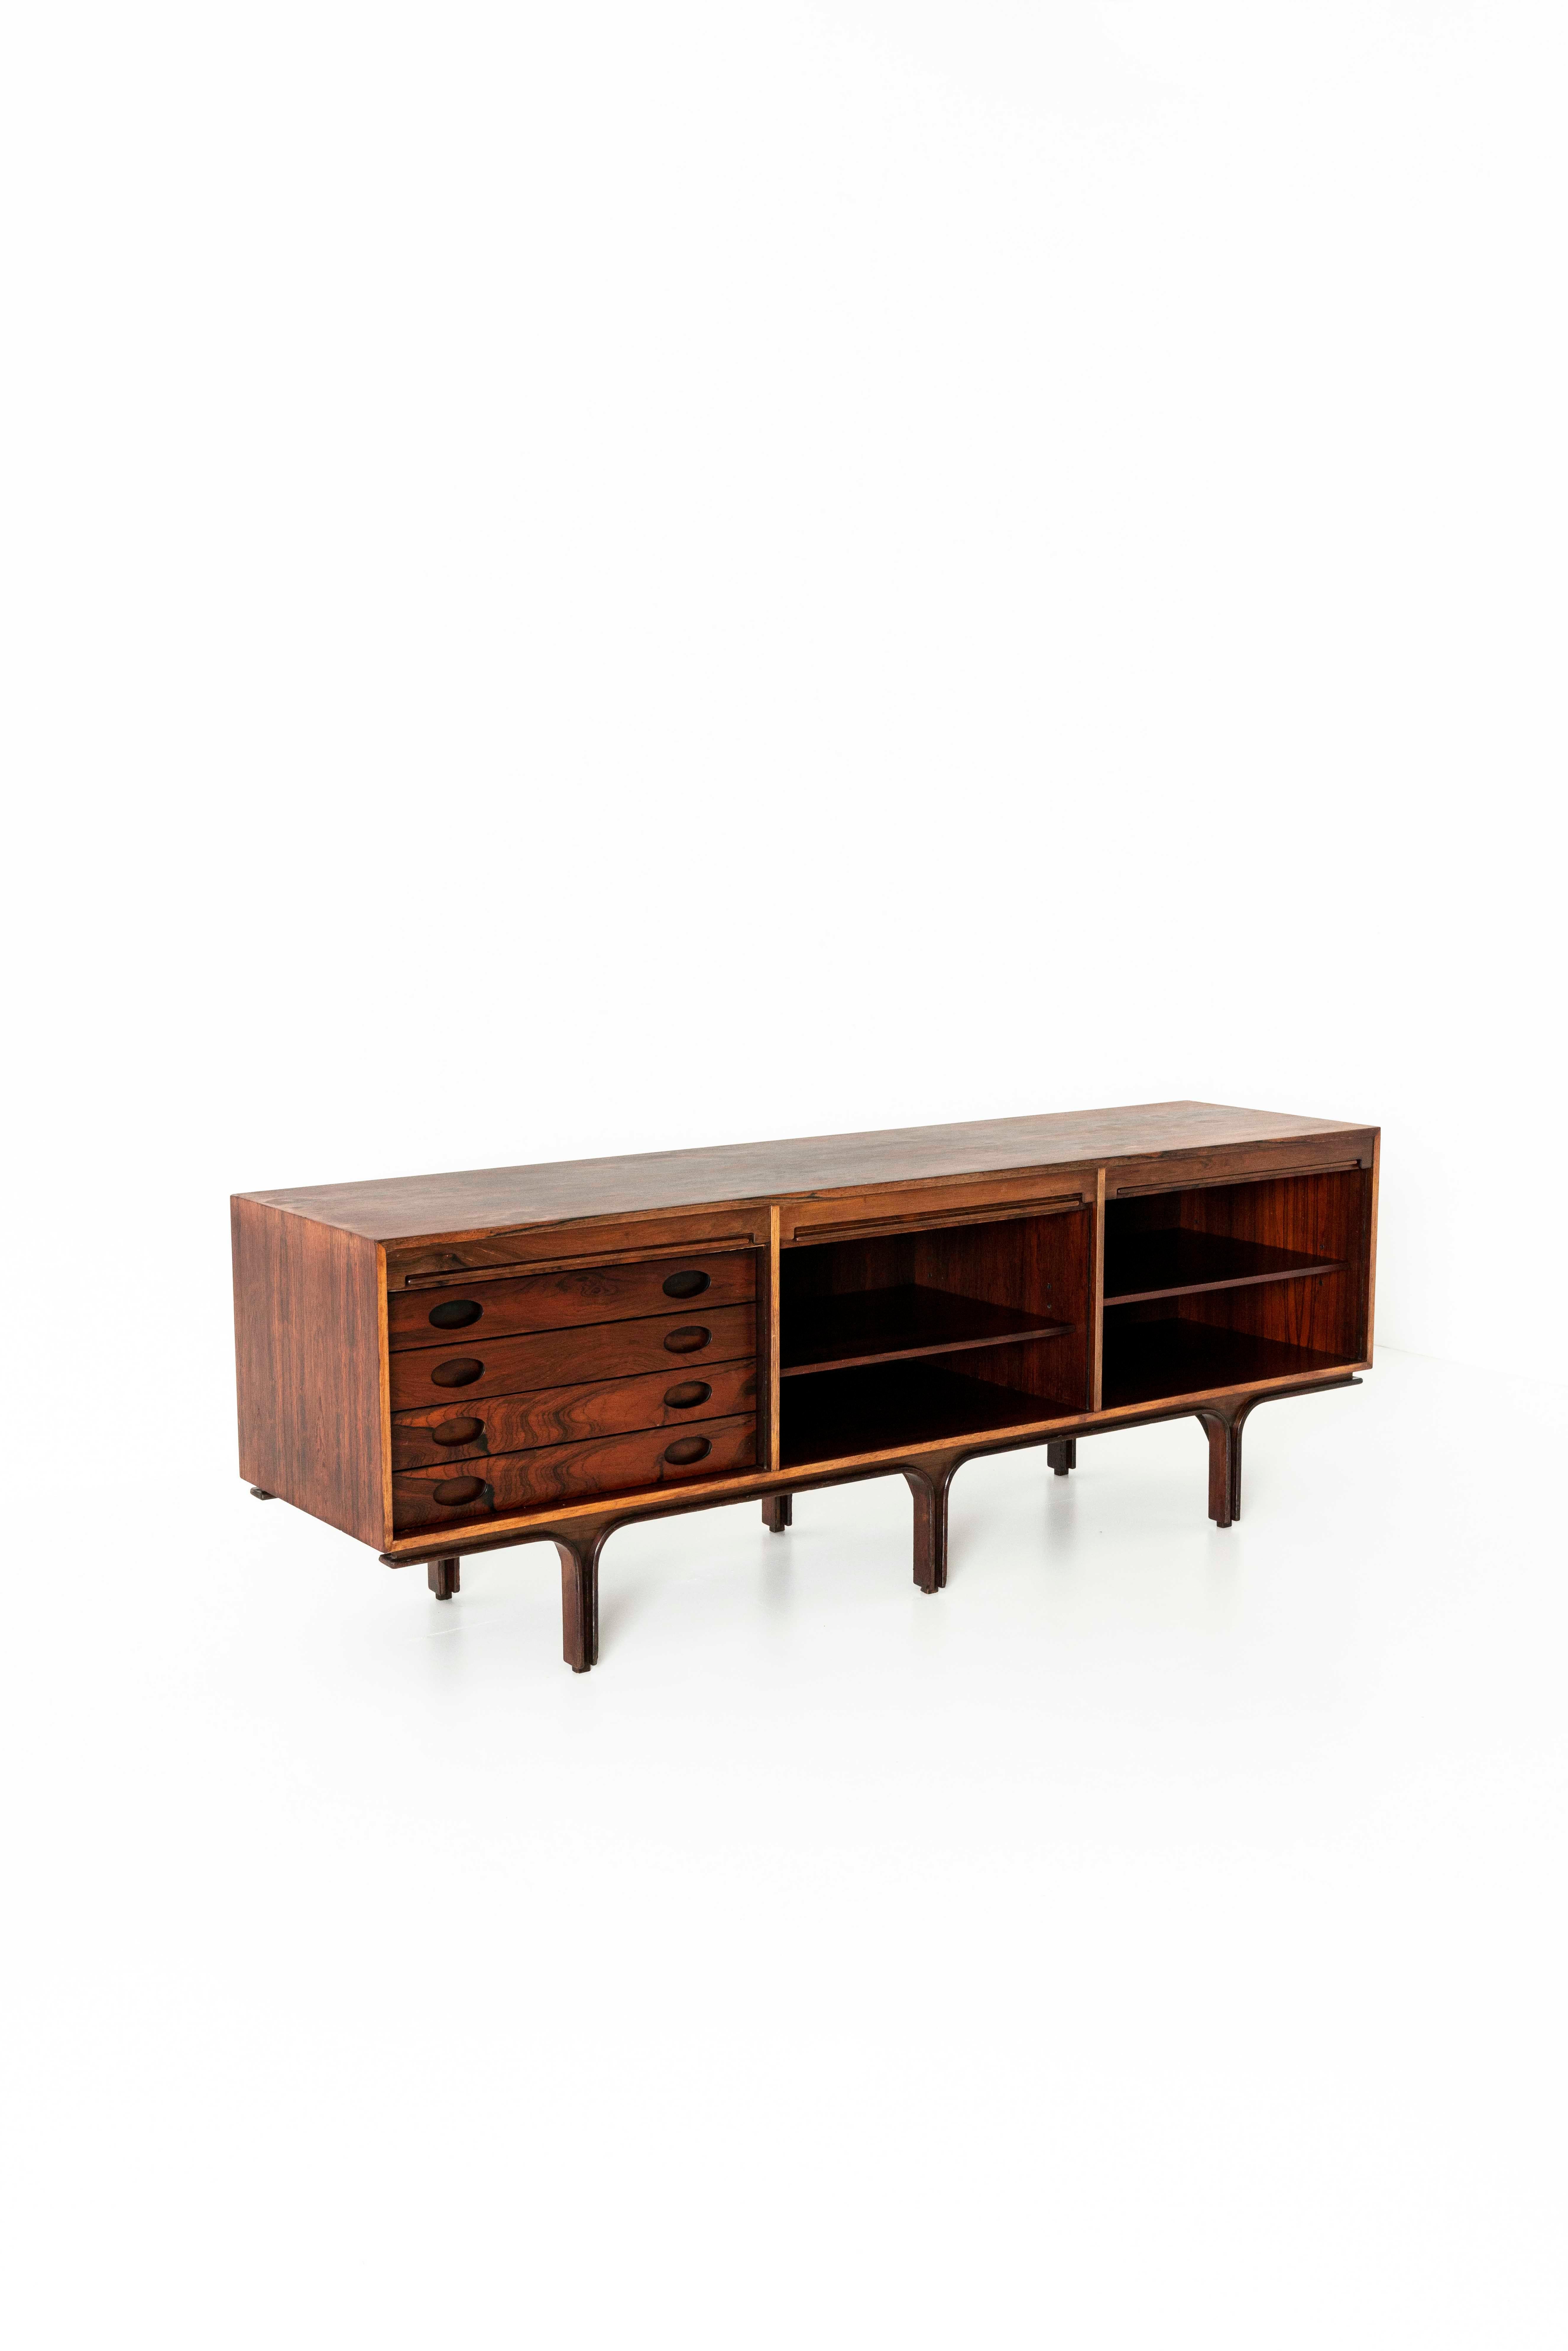 Mid-20th Century Sideboard by Gianfranco Frattini for Bernini in Rosewood, 1963, Italy